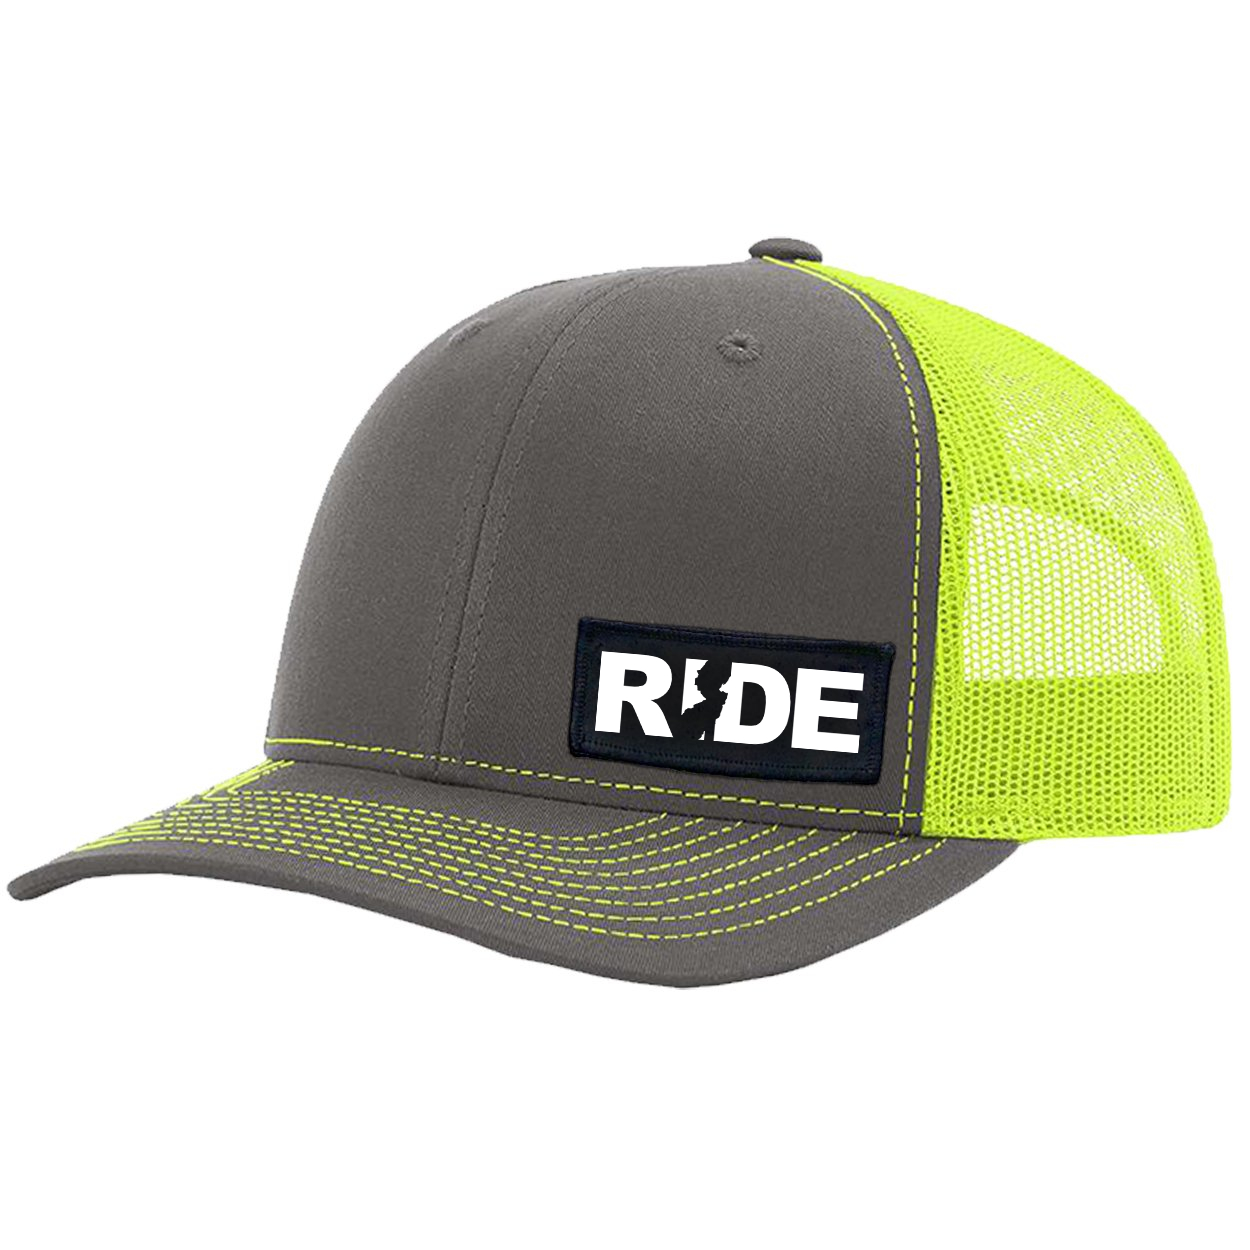 Ride New Jersey Night Out Woven Patch Snapback Trucker Hat Charcoal/Neon Yellow (White Logo)